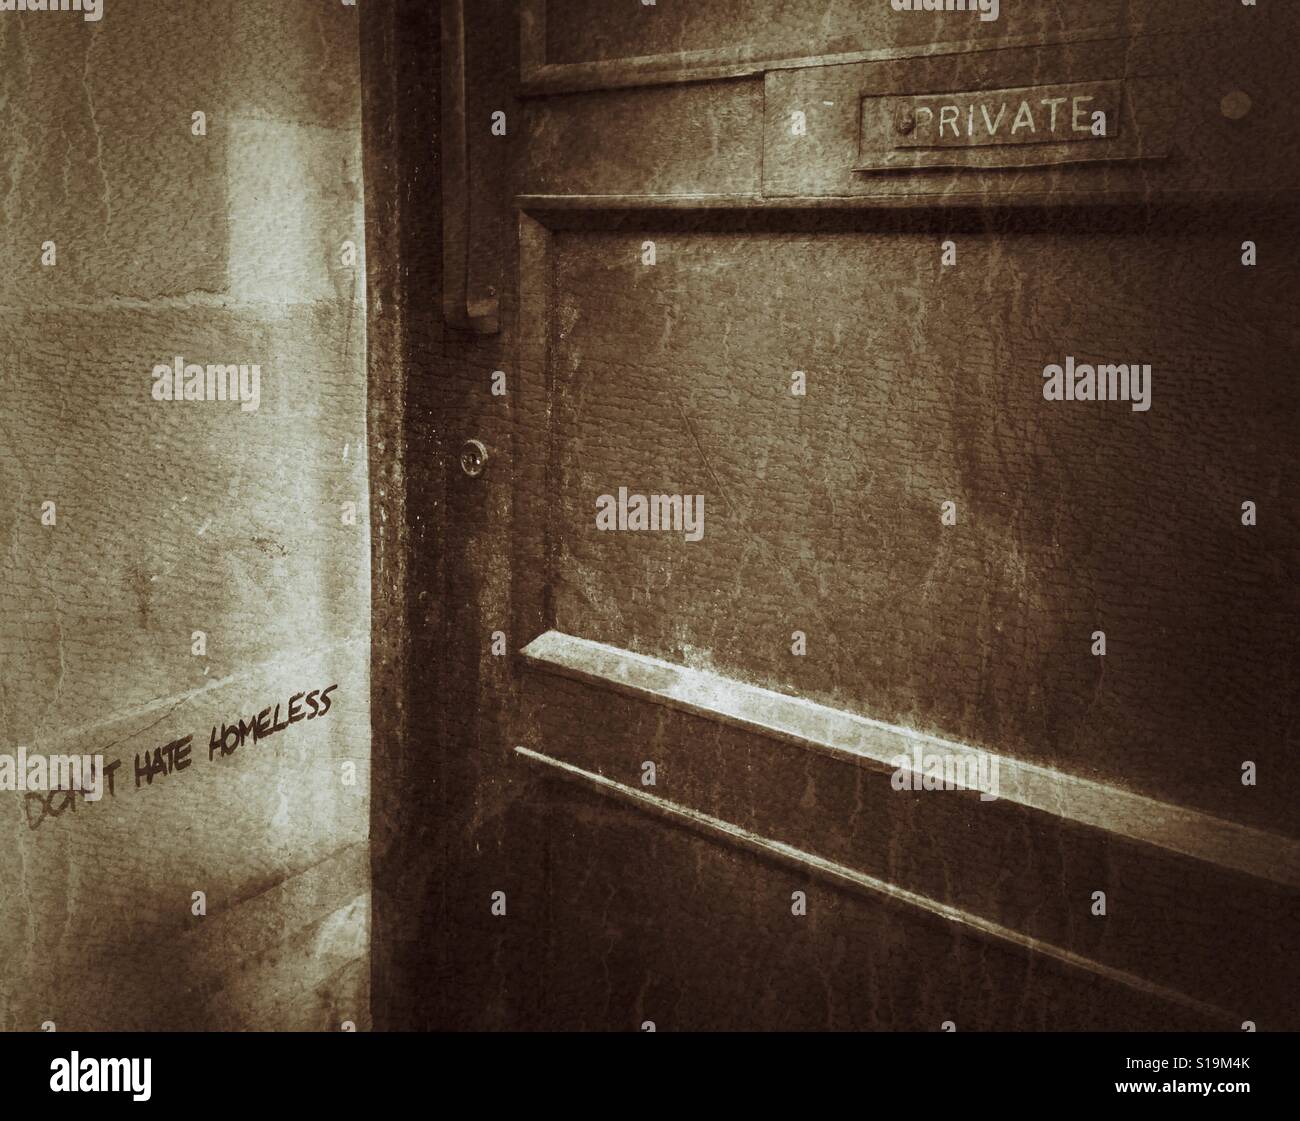 A grungey sepia photograph of graffiti reading 'DON'T HATE HOMELESS' on a wall next to a door marked 'PRIVATE' in a town in the UK Stock Photo